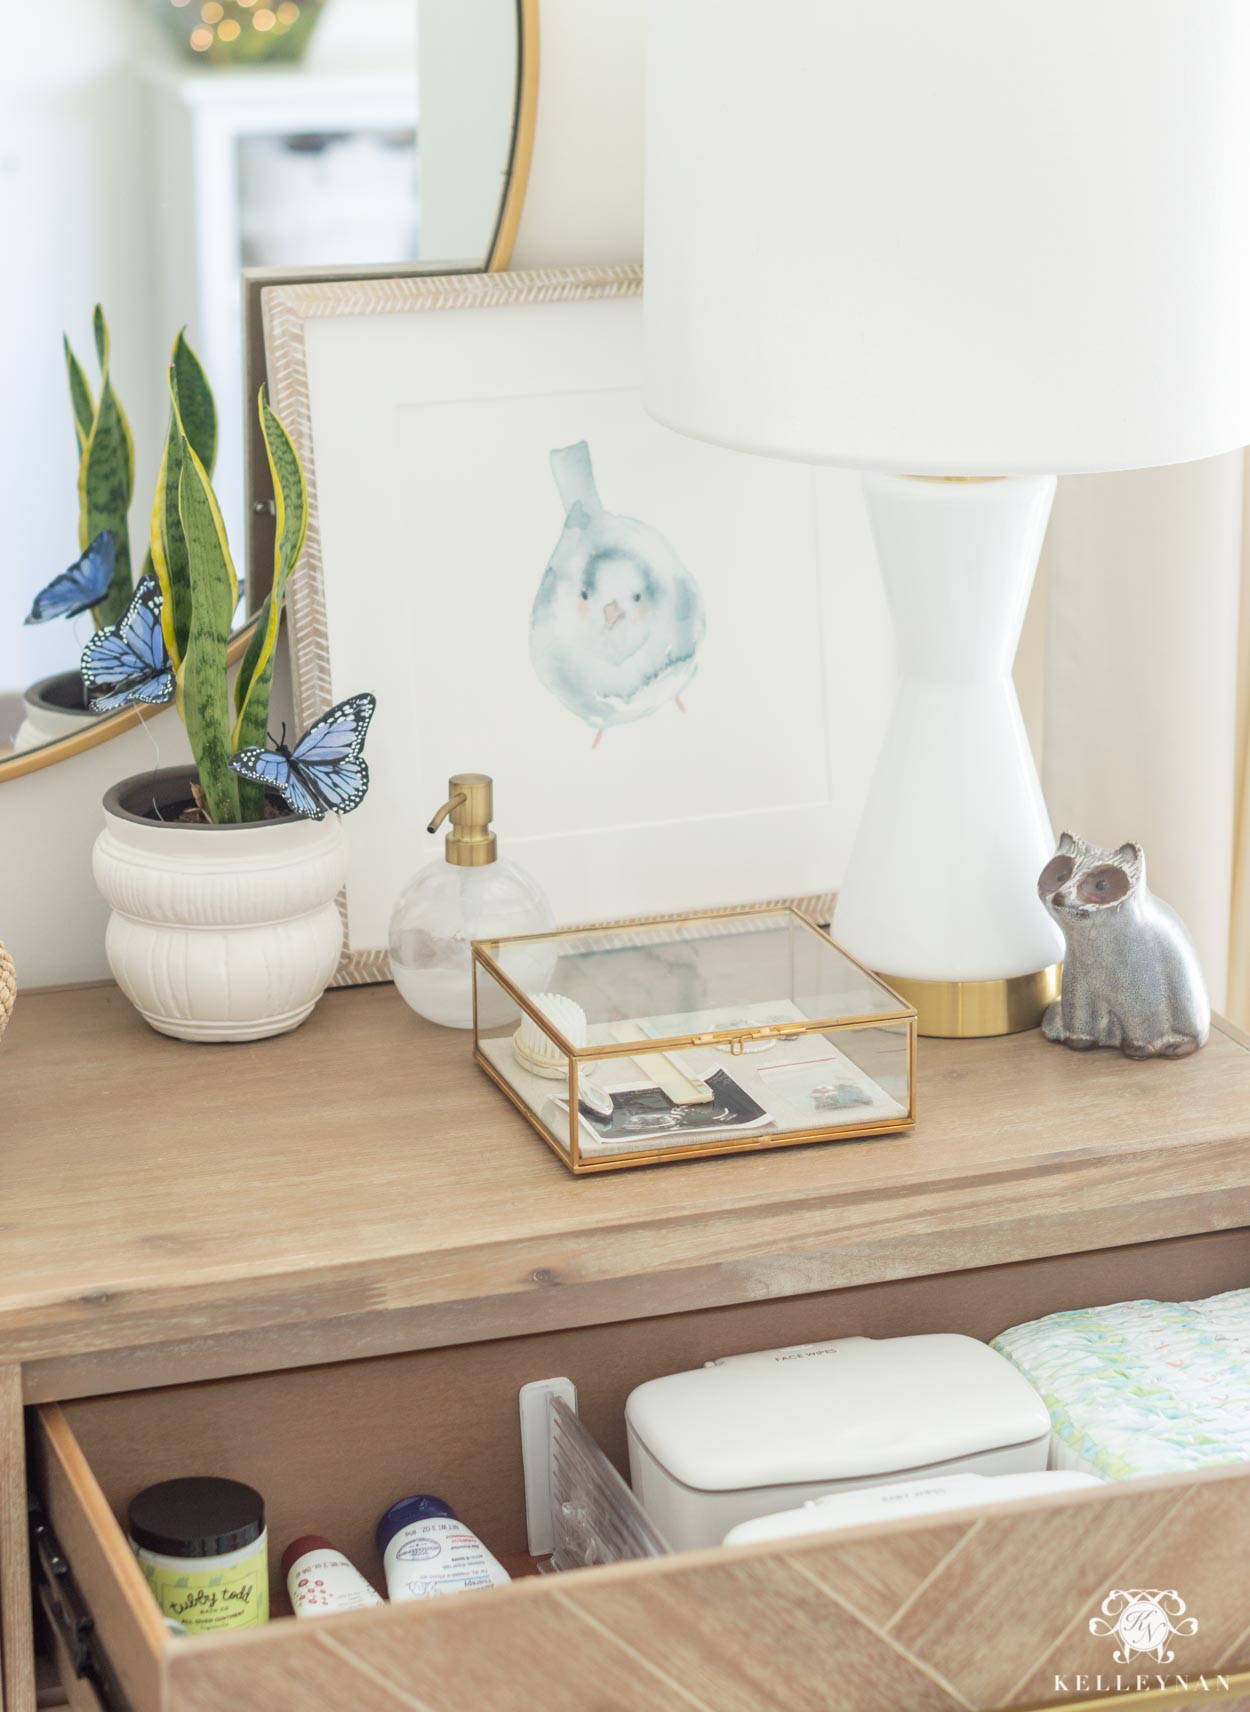 Tips and tricks for organizing your drawers thoughtfully